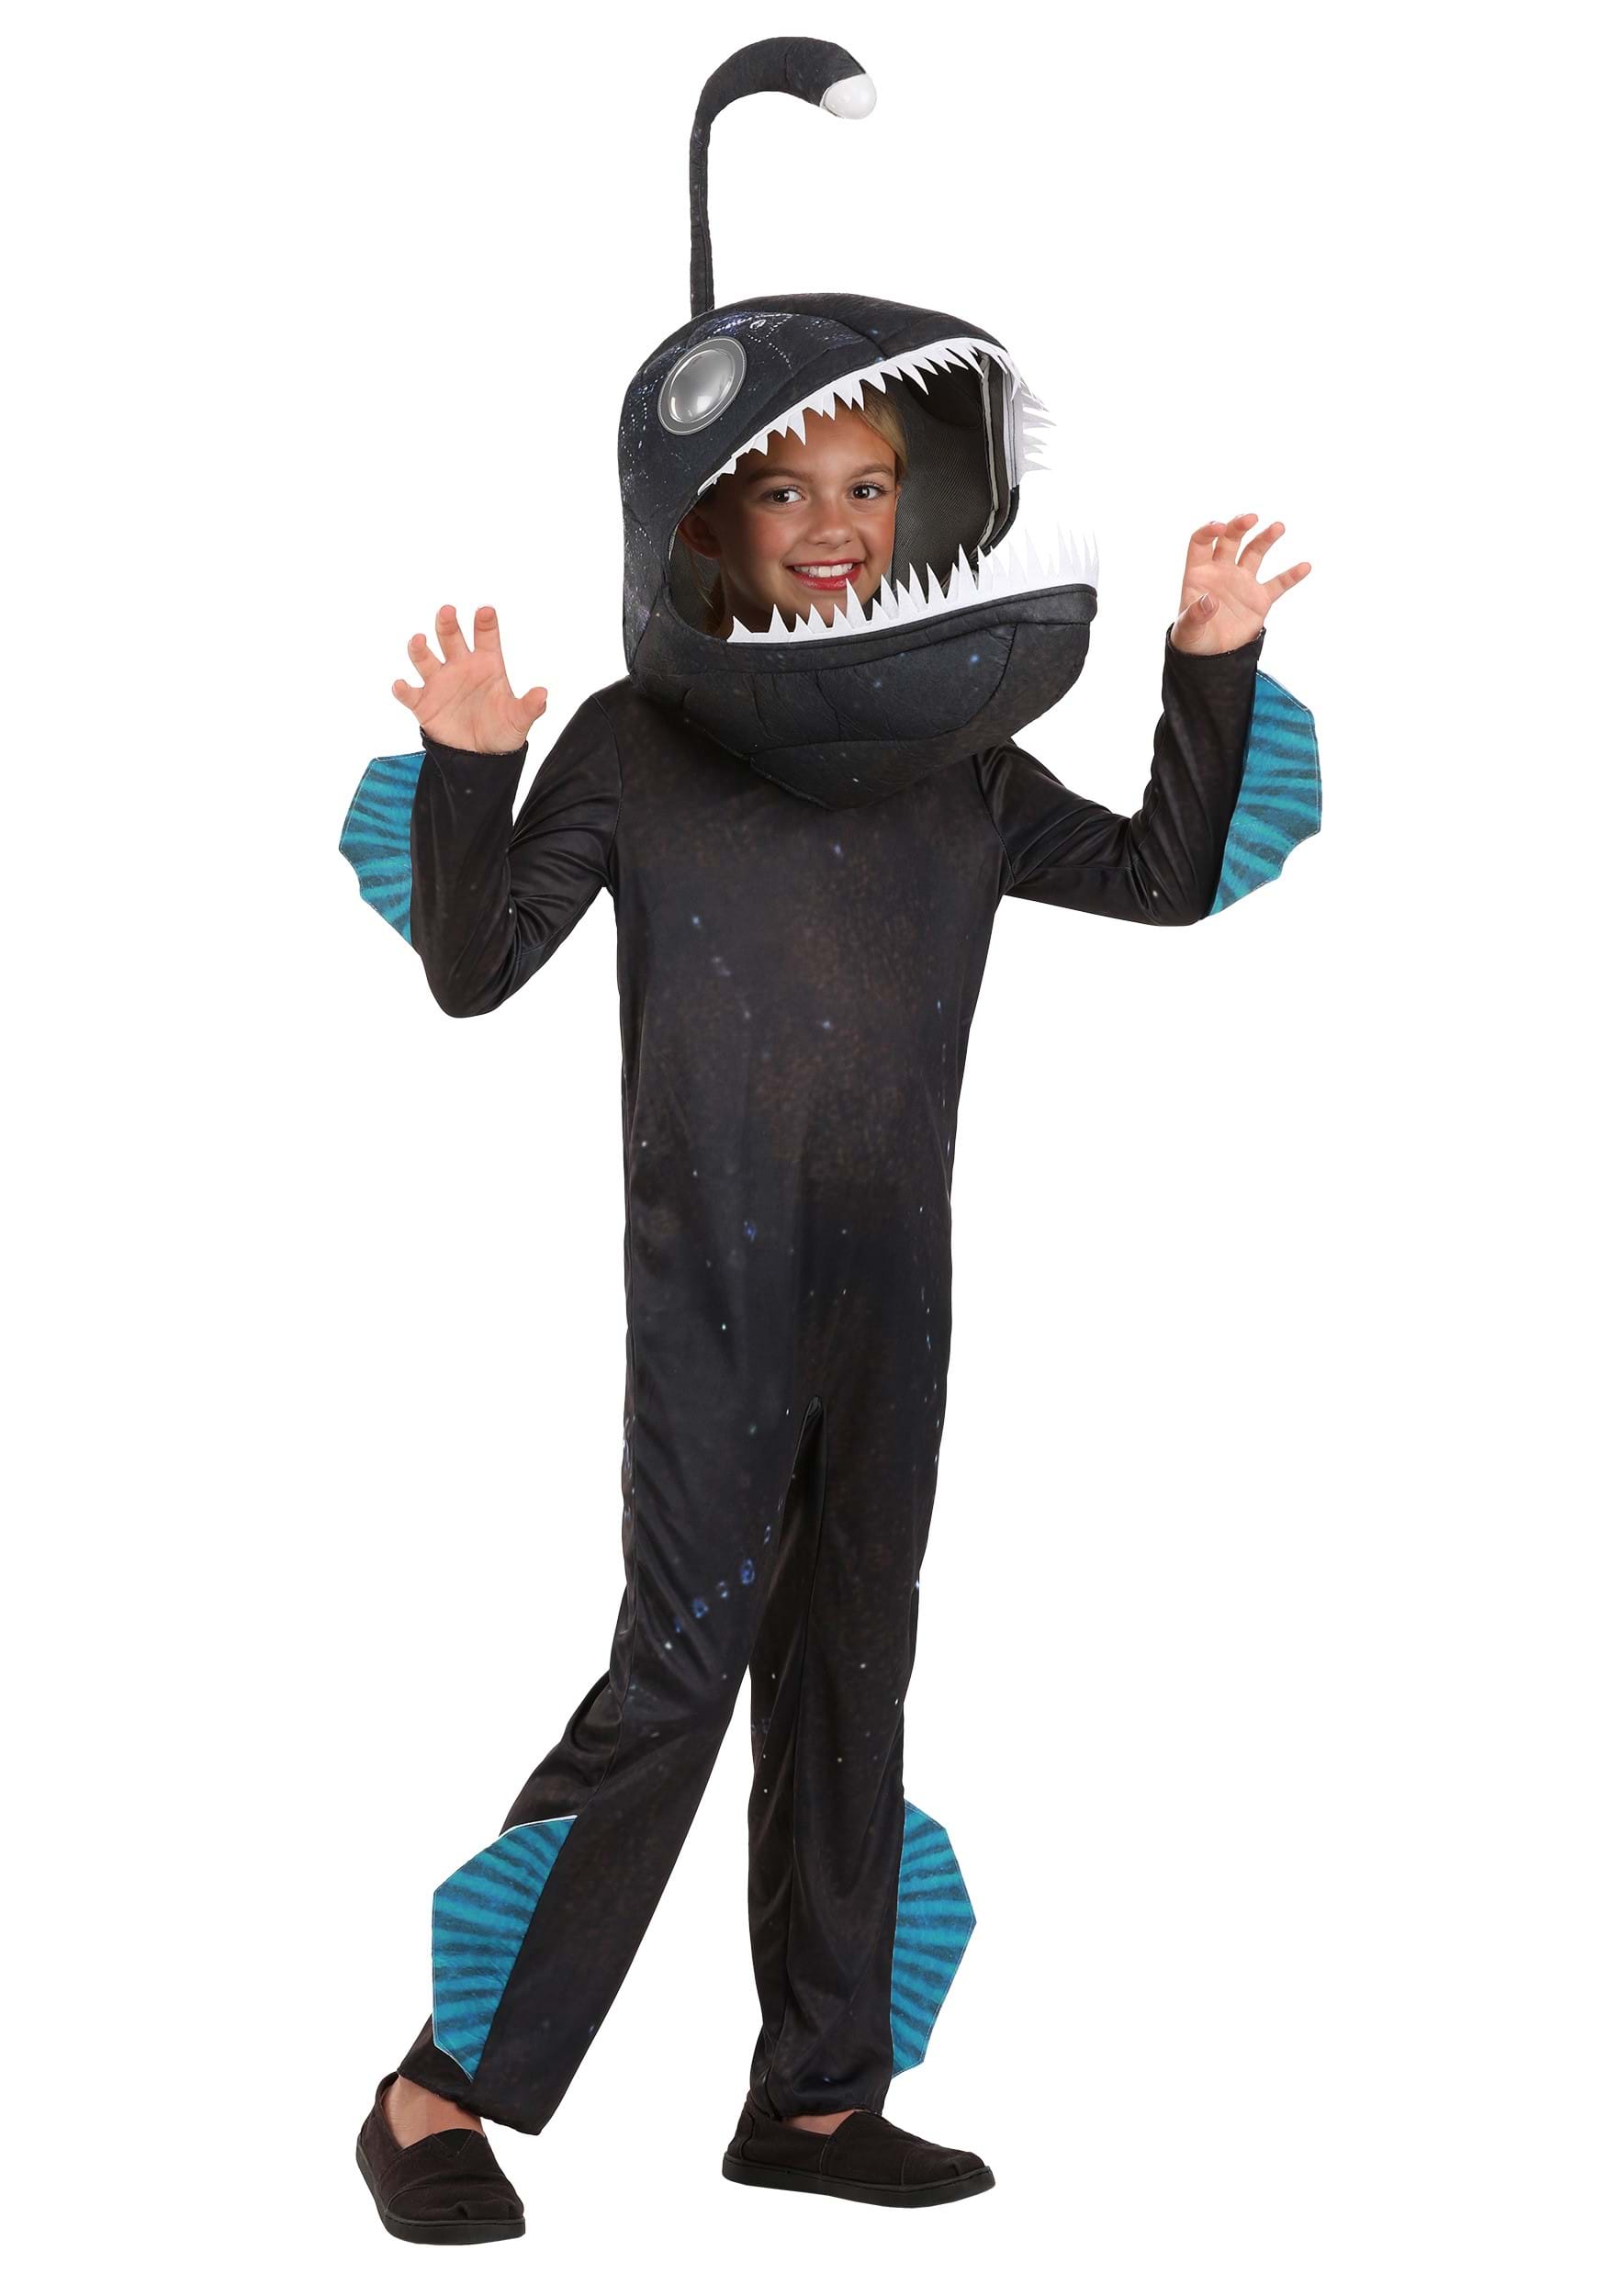 https://images.halloweencostumes.ca/products/79433/2-1-286385/kids-bigmouth-angler-fish-costume-alt-7.jpg